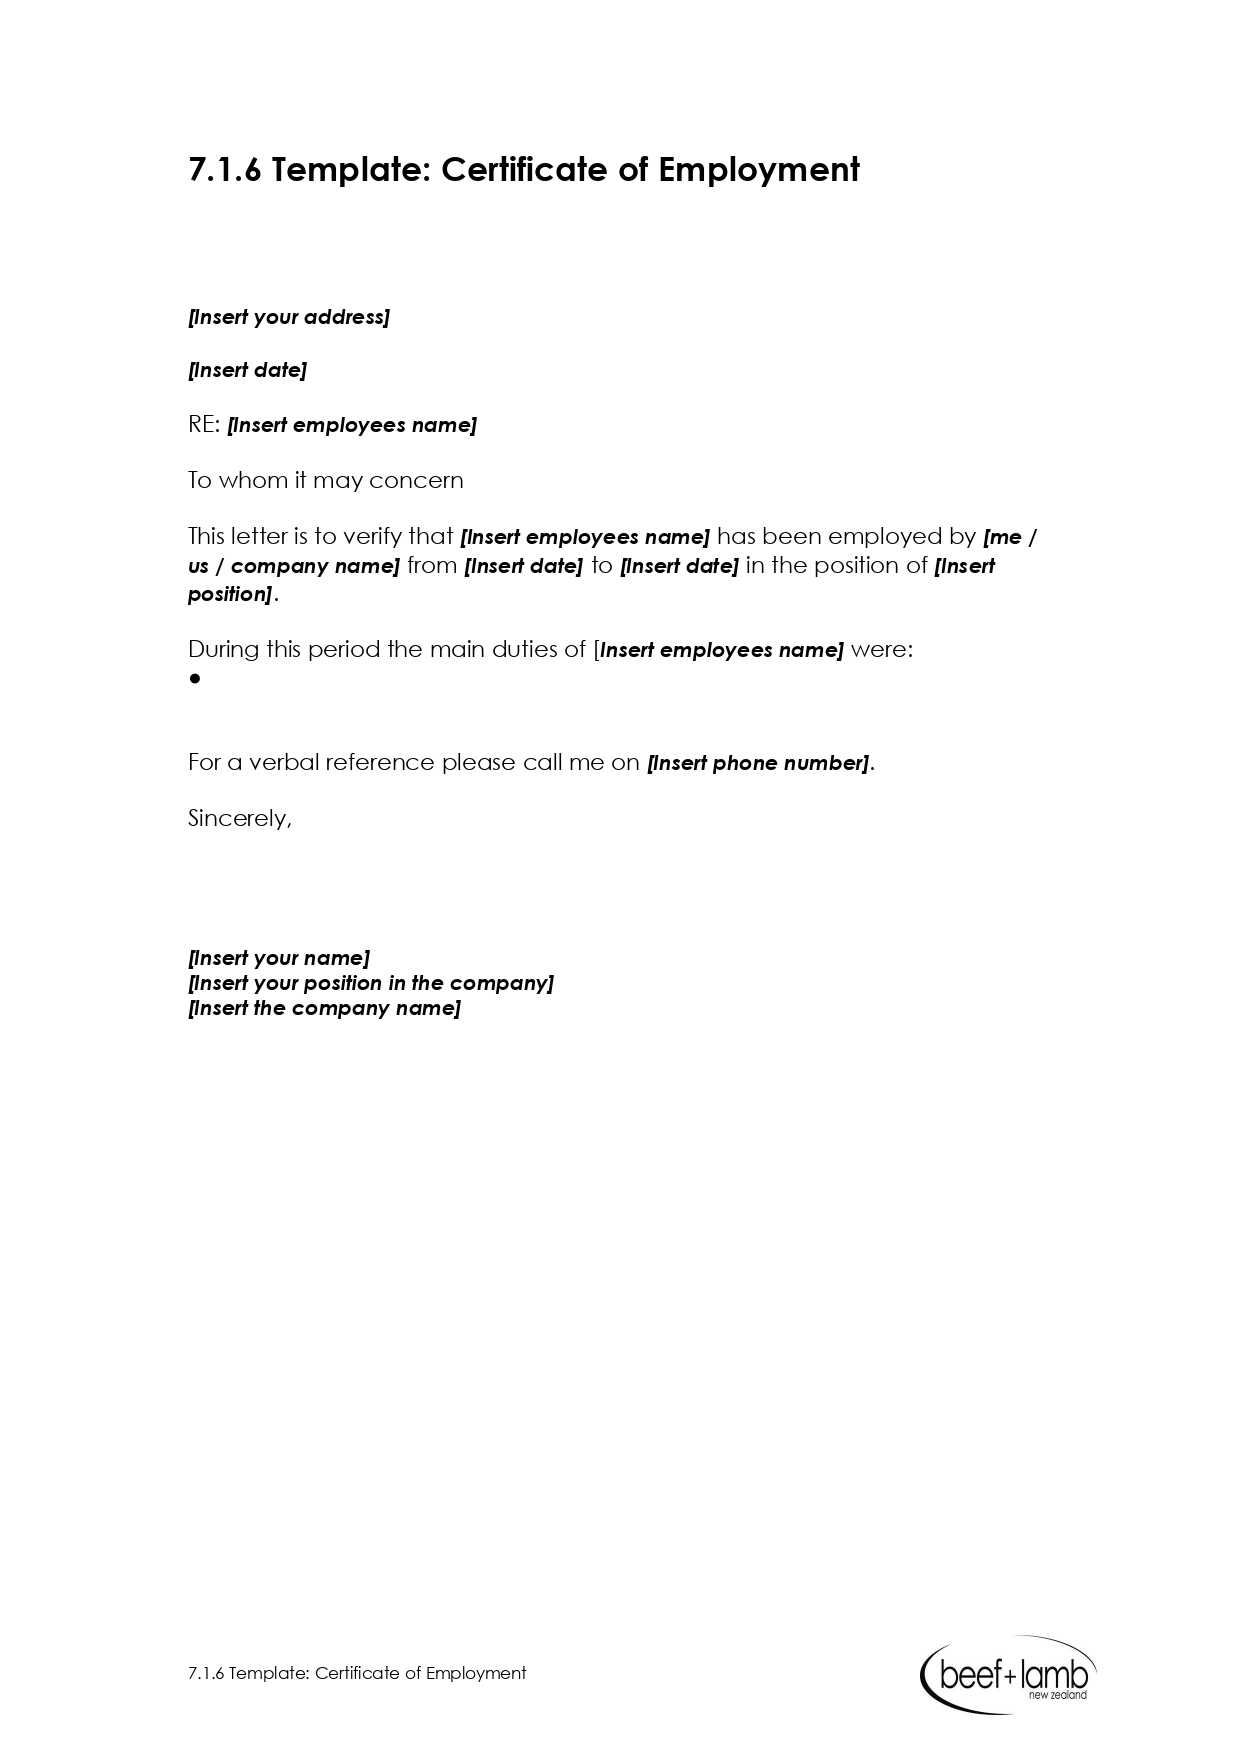 Editable Certificate Of Employment Template - Google Docs Pertaining To Certificate Of Employment Template